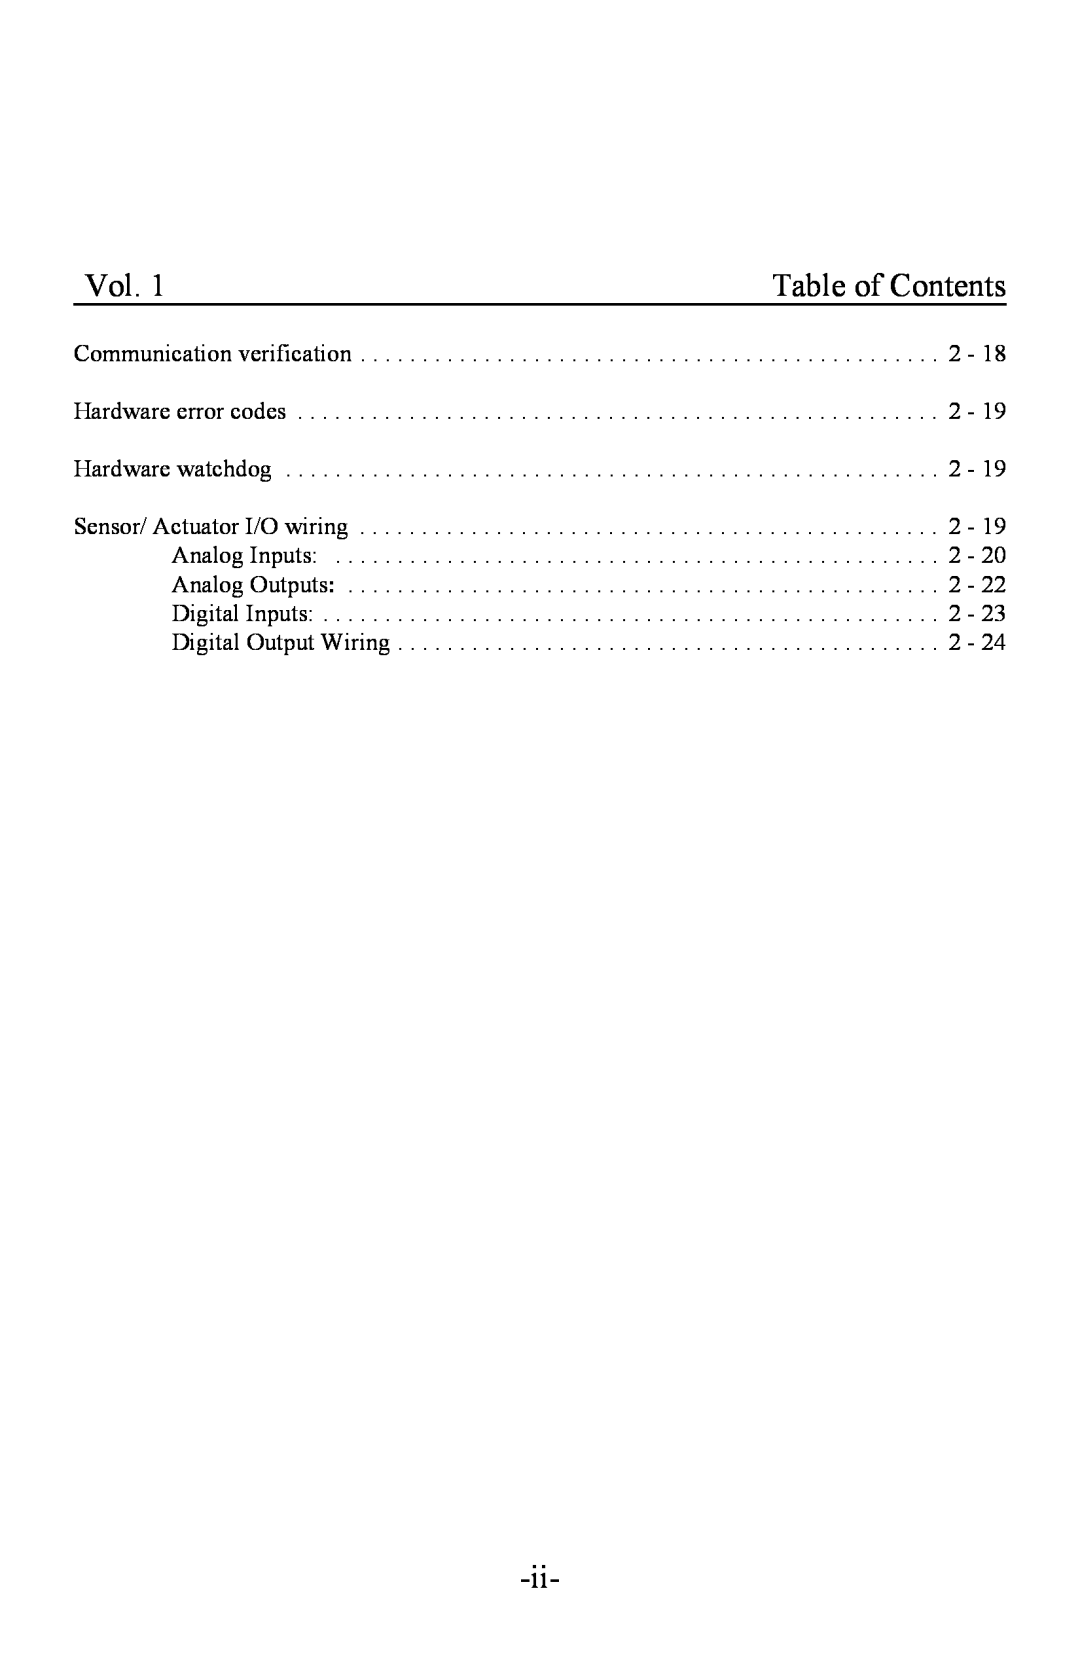 I-O Display Systems Basic I/O Product manual Table of Contents 